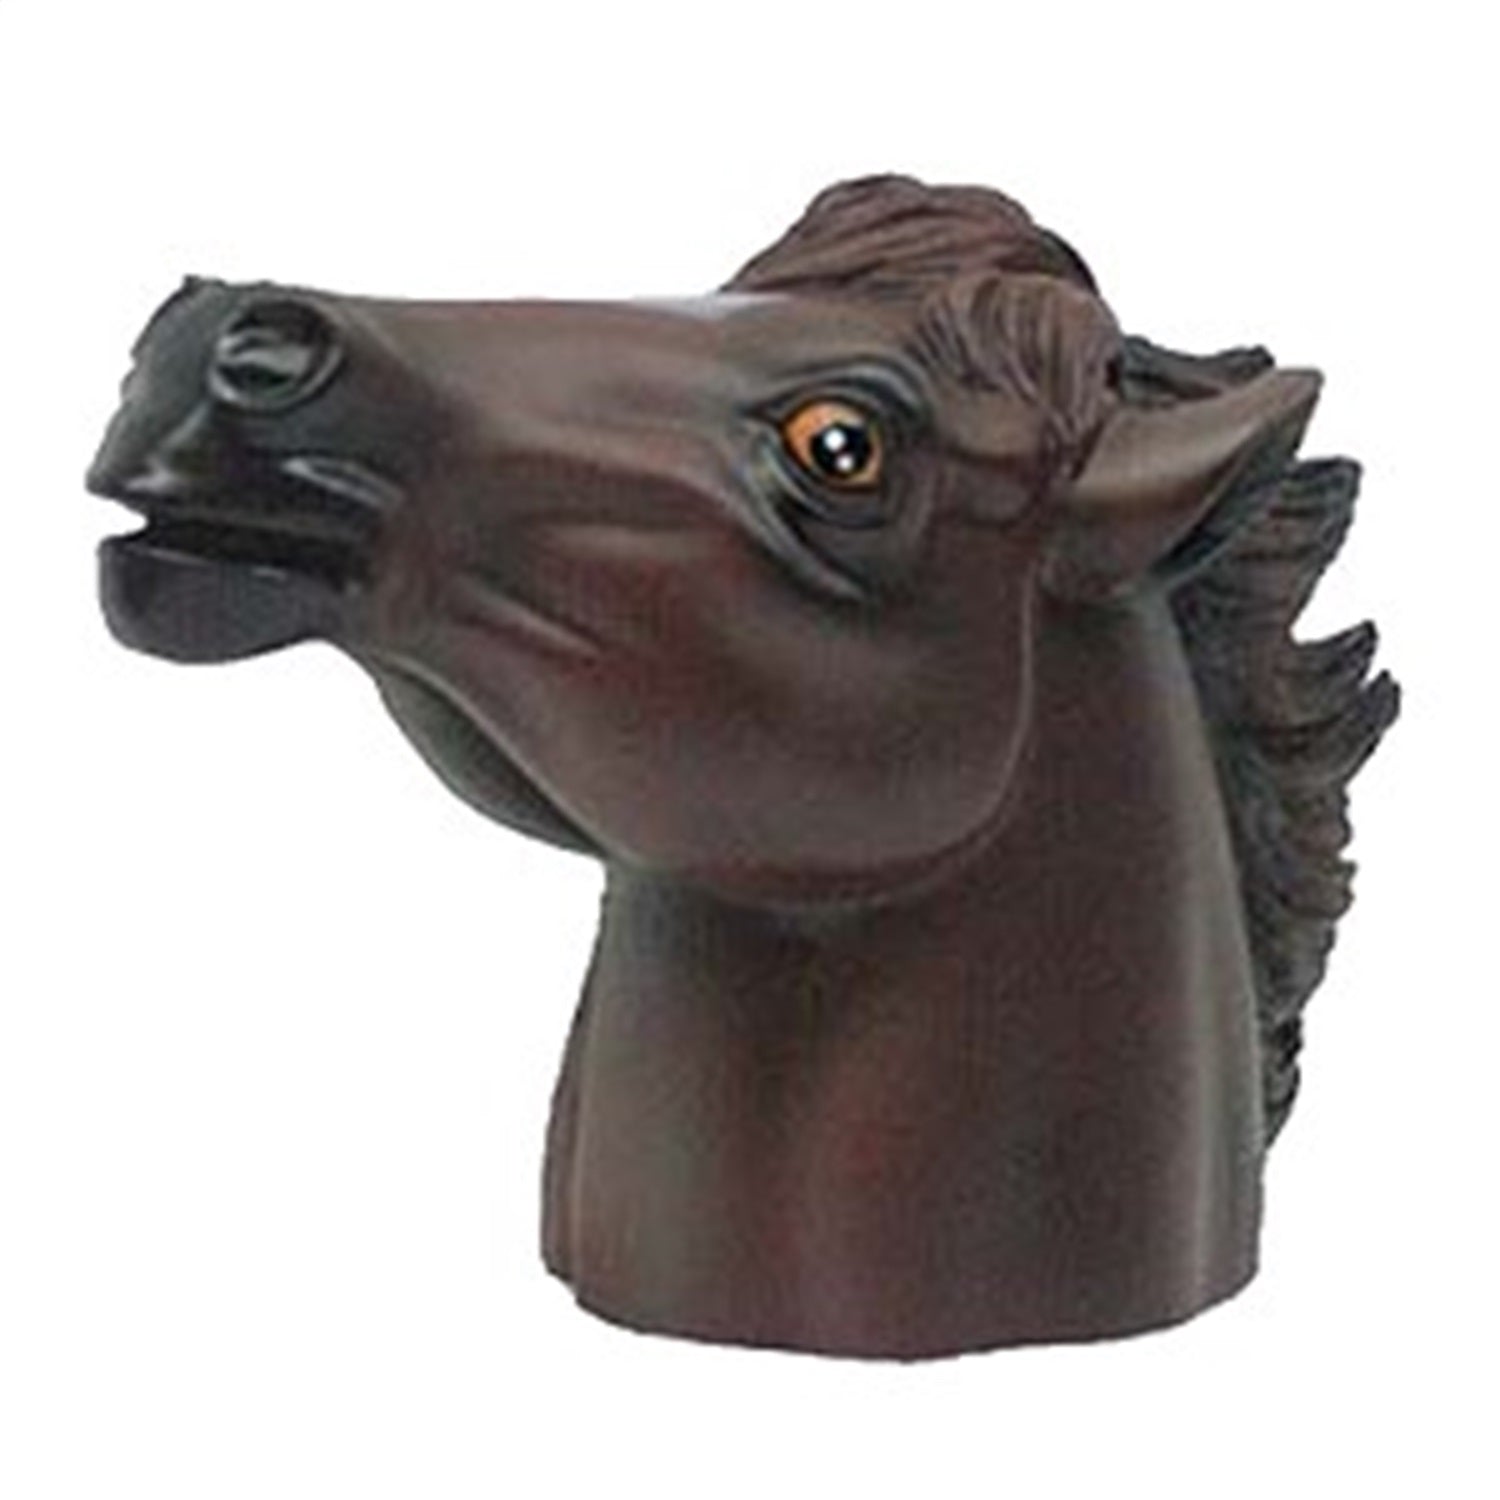 HORSE HITCH BALL COVER CLAMSHELL